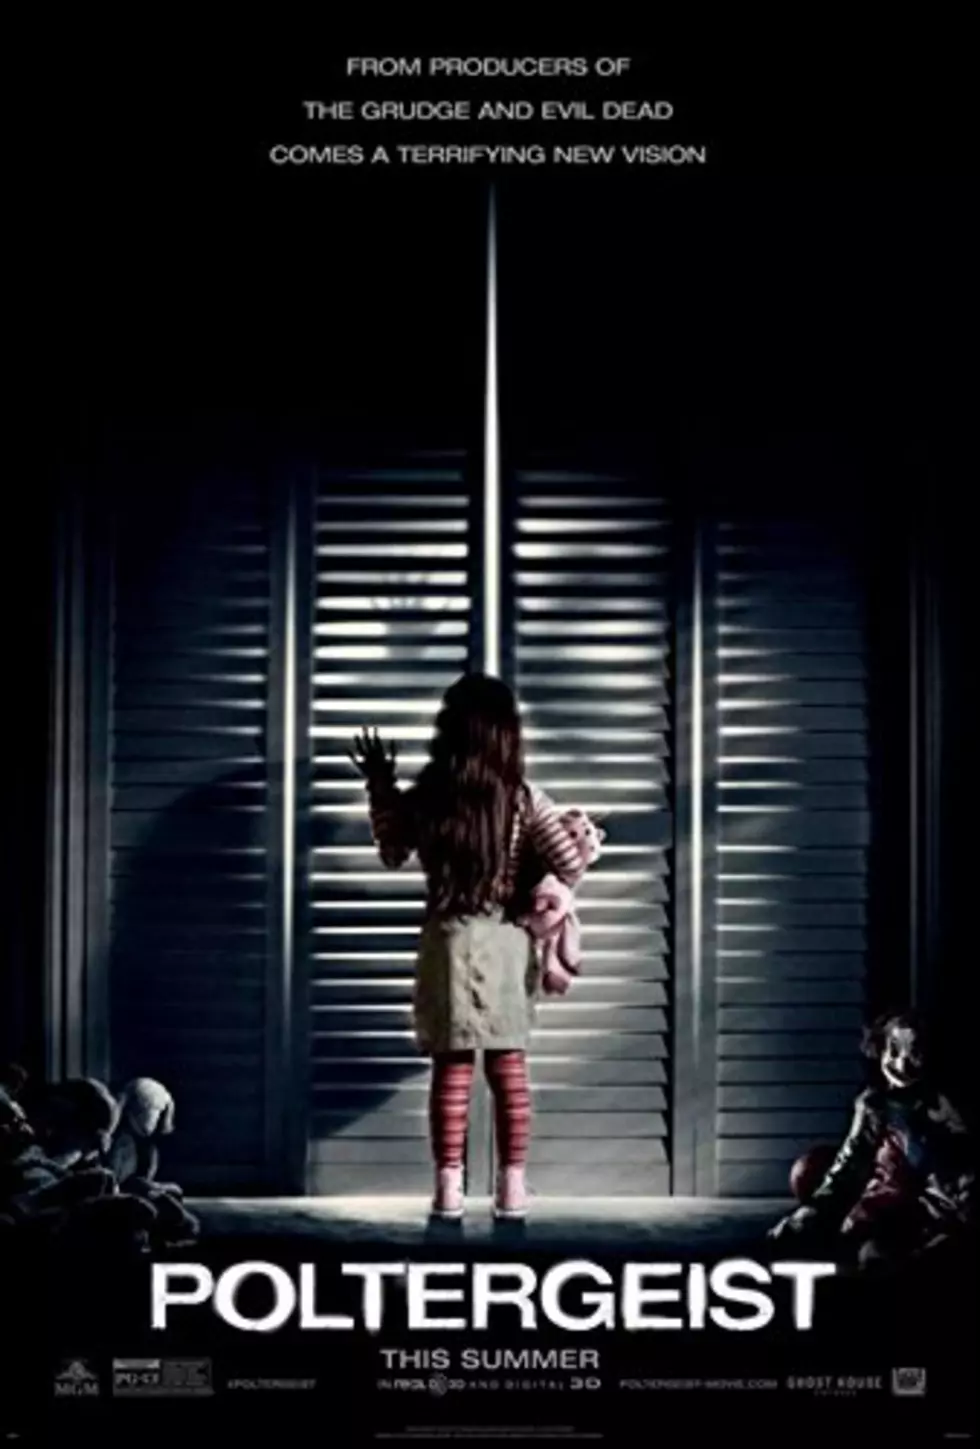 &#8216;Poltergeist&#8217; Trailer &#8211; Do We Need Another Remake [Video]